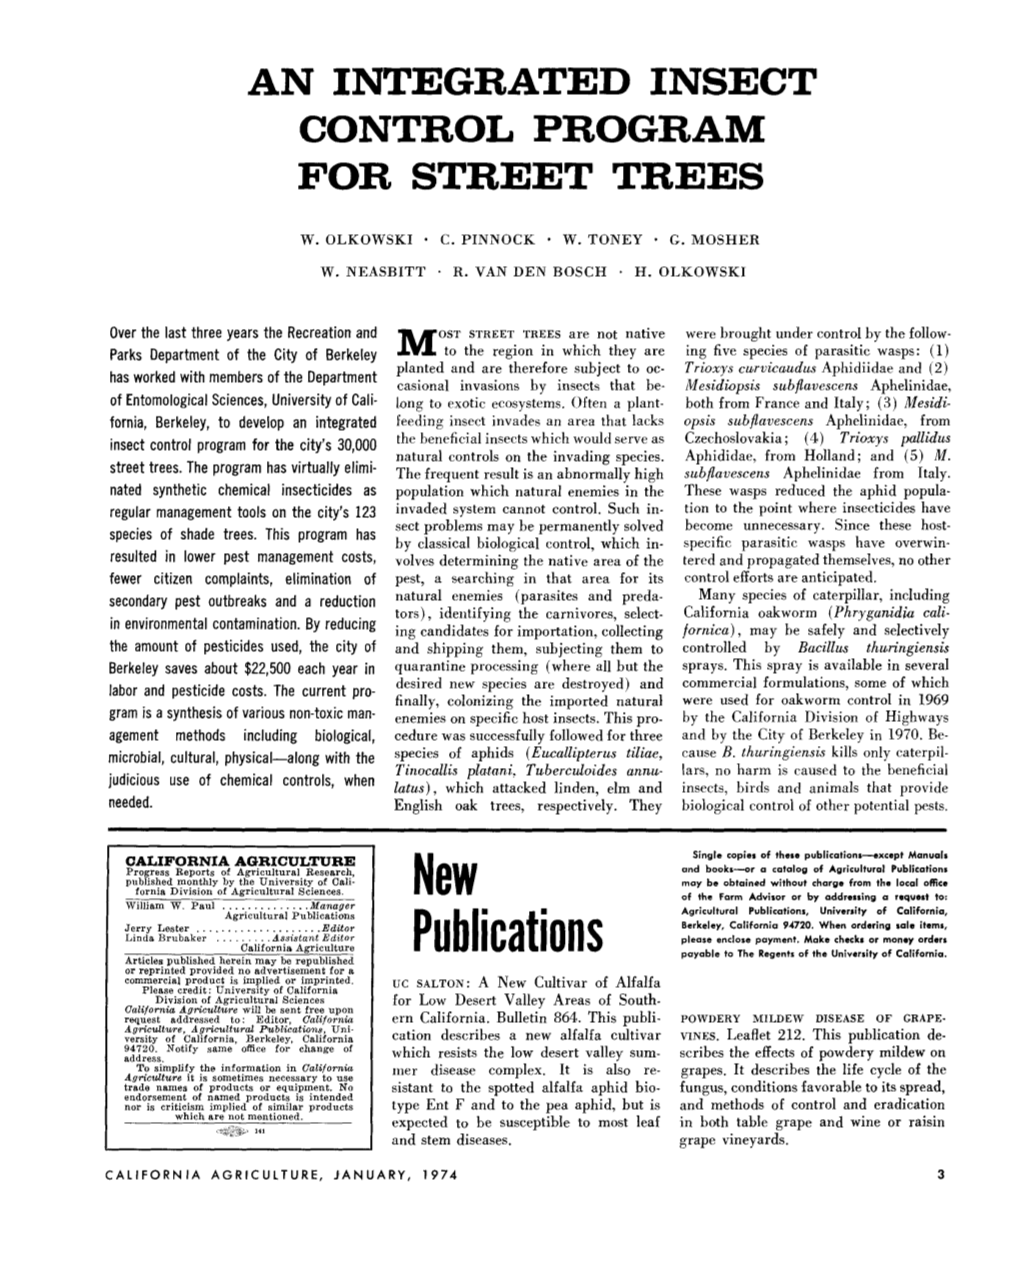 An Integrated Insect Control Program for Street Trees